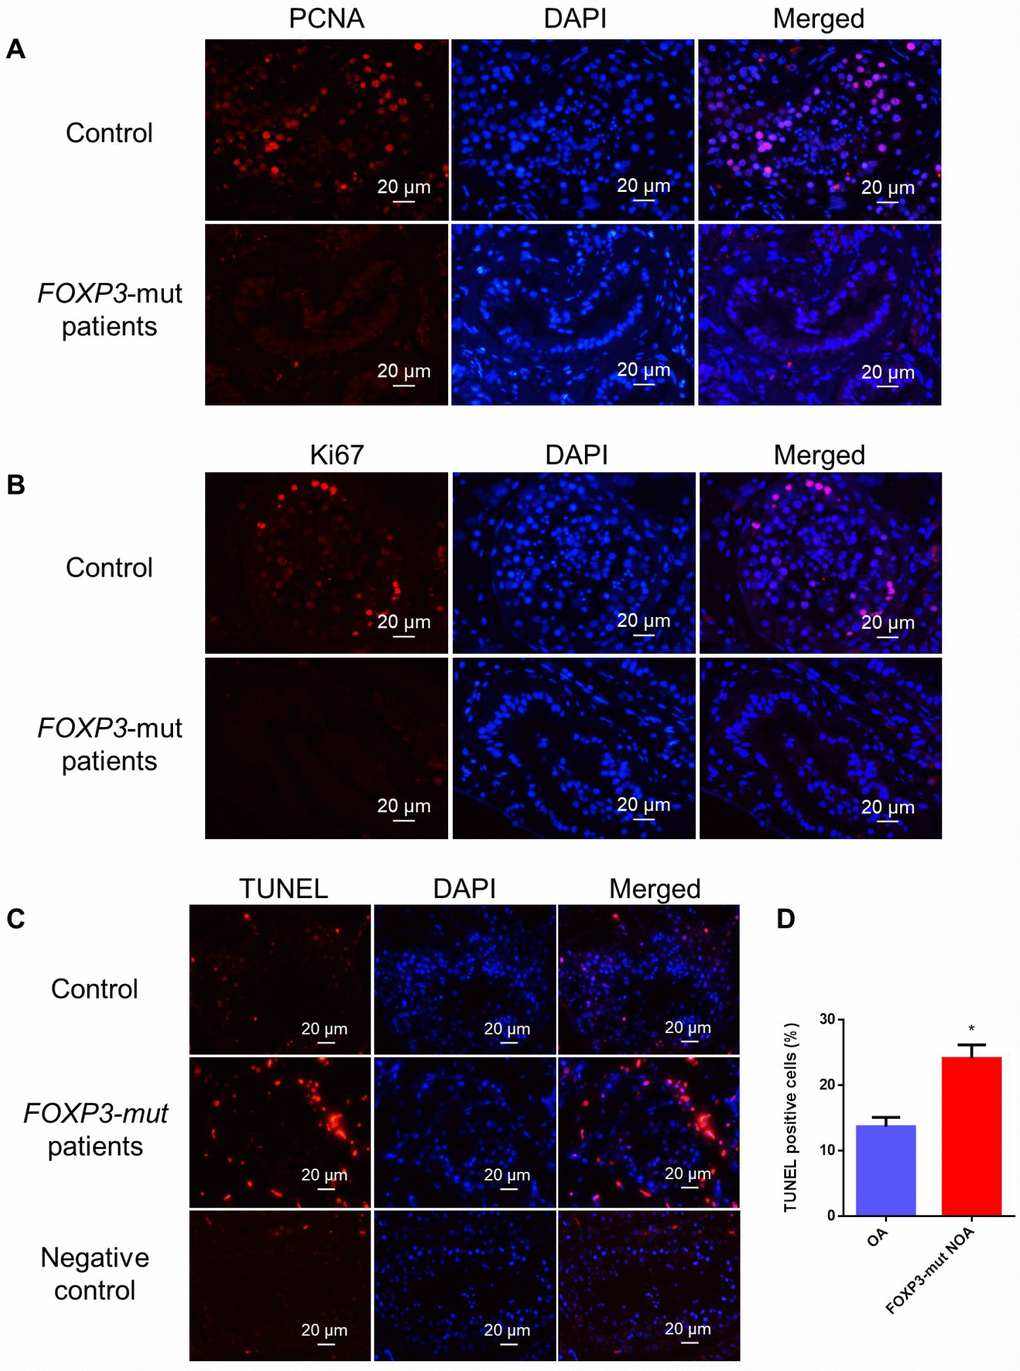 Cell proliferation and apoptosis in the testis of FOXP3-mut NOA patients and OA controls. (A, B) Immunohistochemical staining showed the levels of PCNA (A) and Ki67 (B), the hallmarks for cell proliferation, were decreased in FOXP3-mut NOA patients (lower panels) compared to the OA controls (upper panels). (C) TUNEL assay demonstrated the TUNEL-positive cells (red fluorescence) in FOXP3-mut NOA patients and OA controls. DAPI (blue fluorescence) was used to label cellular nuclei. Replacing the TdT enzyme with PBS was used as the negative control. Scale bars in A-C= 20 μm. (D) The percentages of apoptosis in male germ cells of FOXP3-mut NOA patients and OA controls were calculated using Student’s t-test. All values are means ± SD from three independent experiments. * indicated statistically significant differences (p